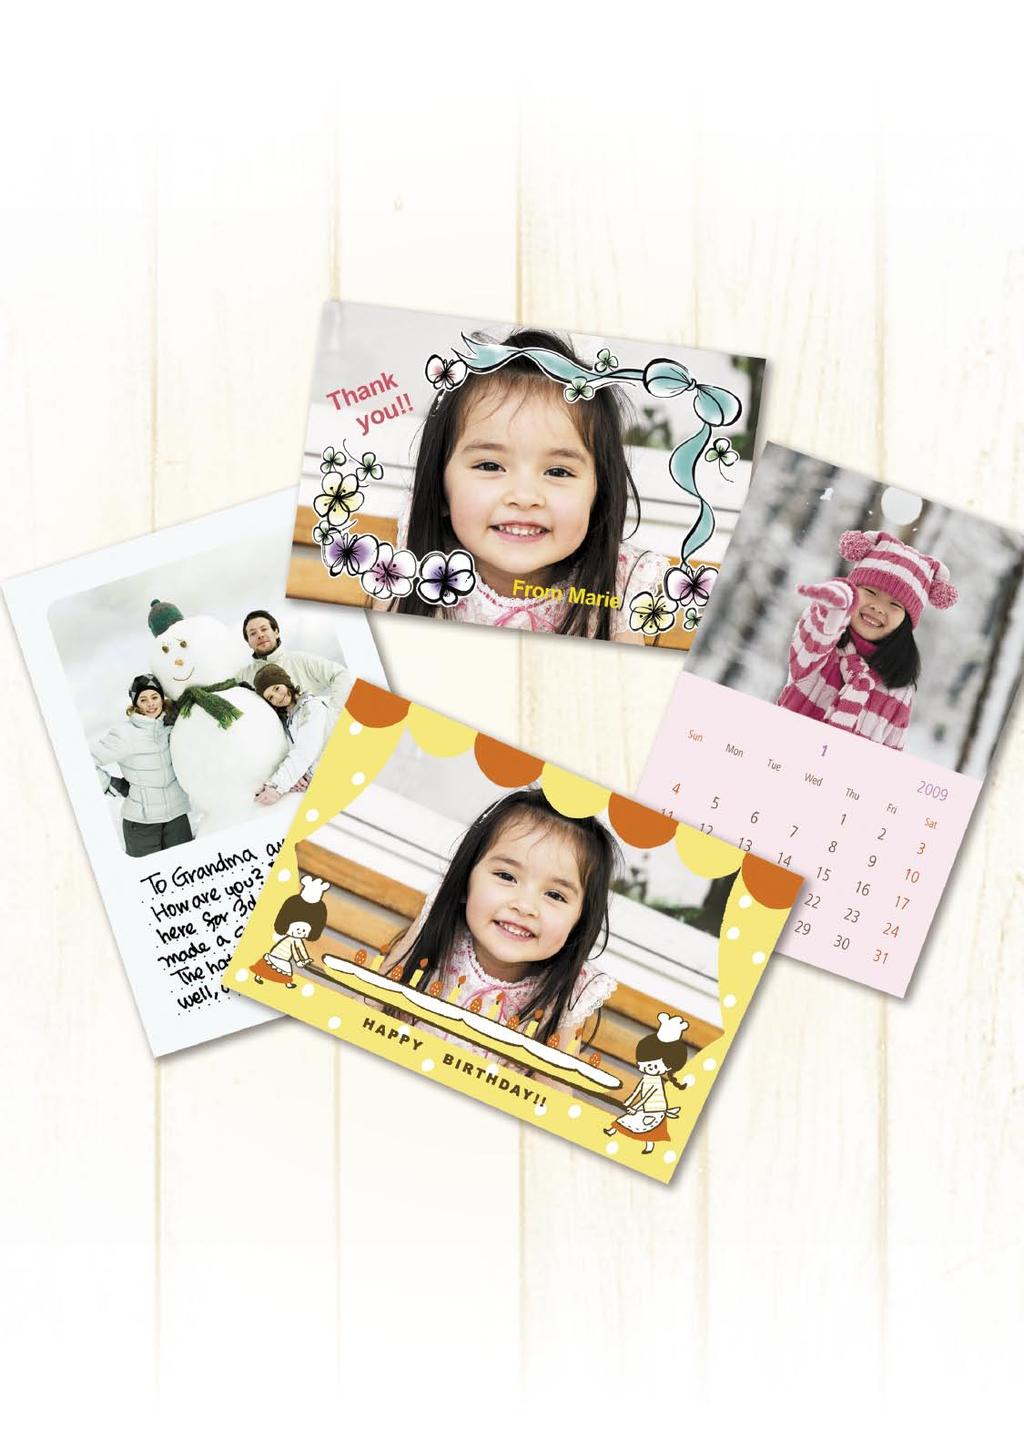 Preserve Your Memories with SELPHY You can easily edit and print family photos to